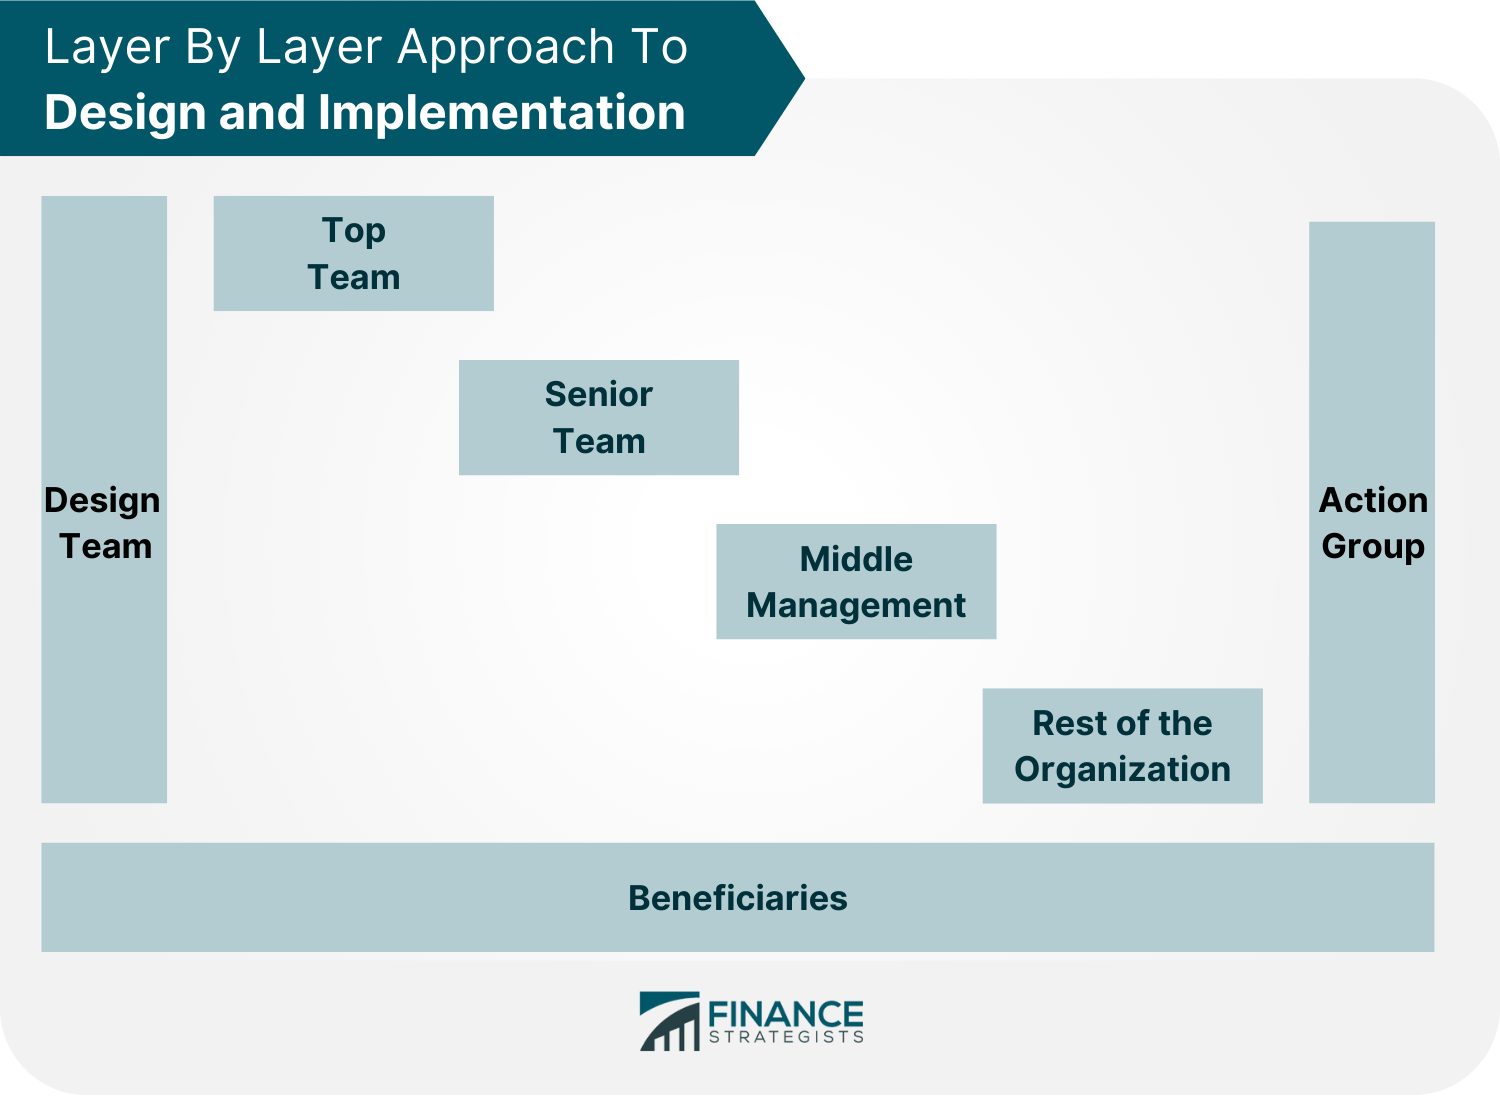 Layer By Layer Approach To Design and Implementation